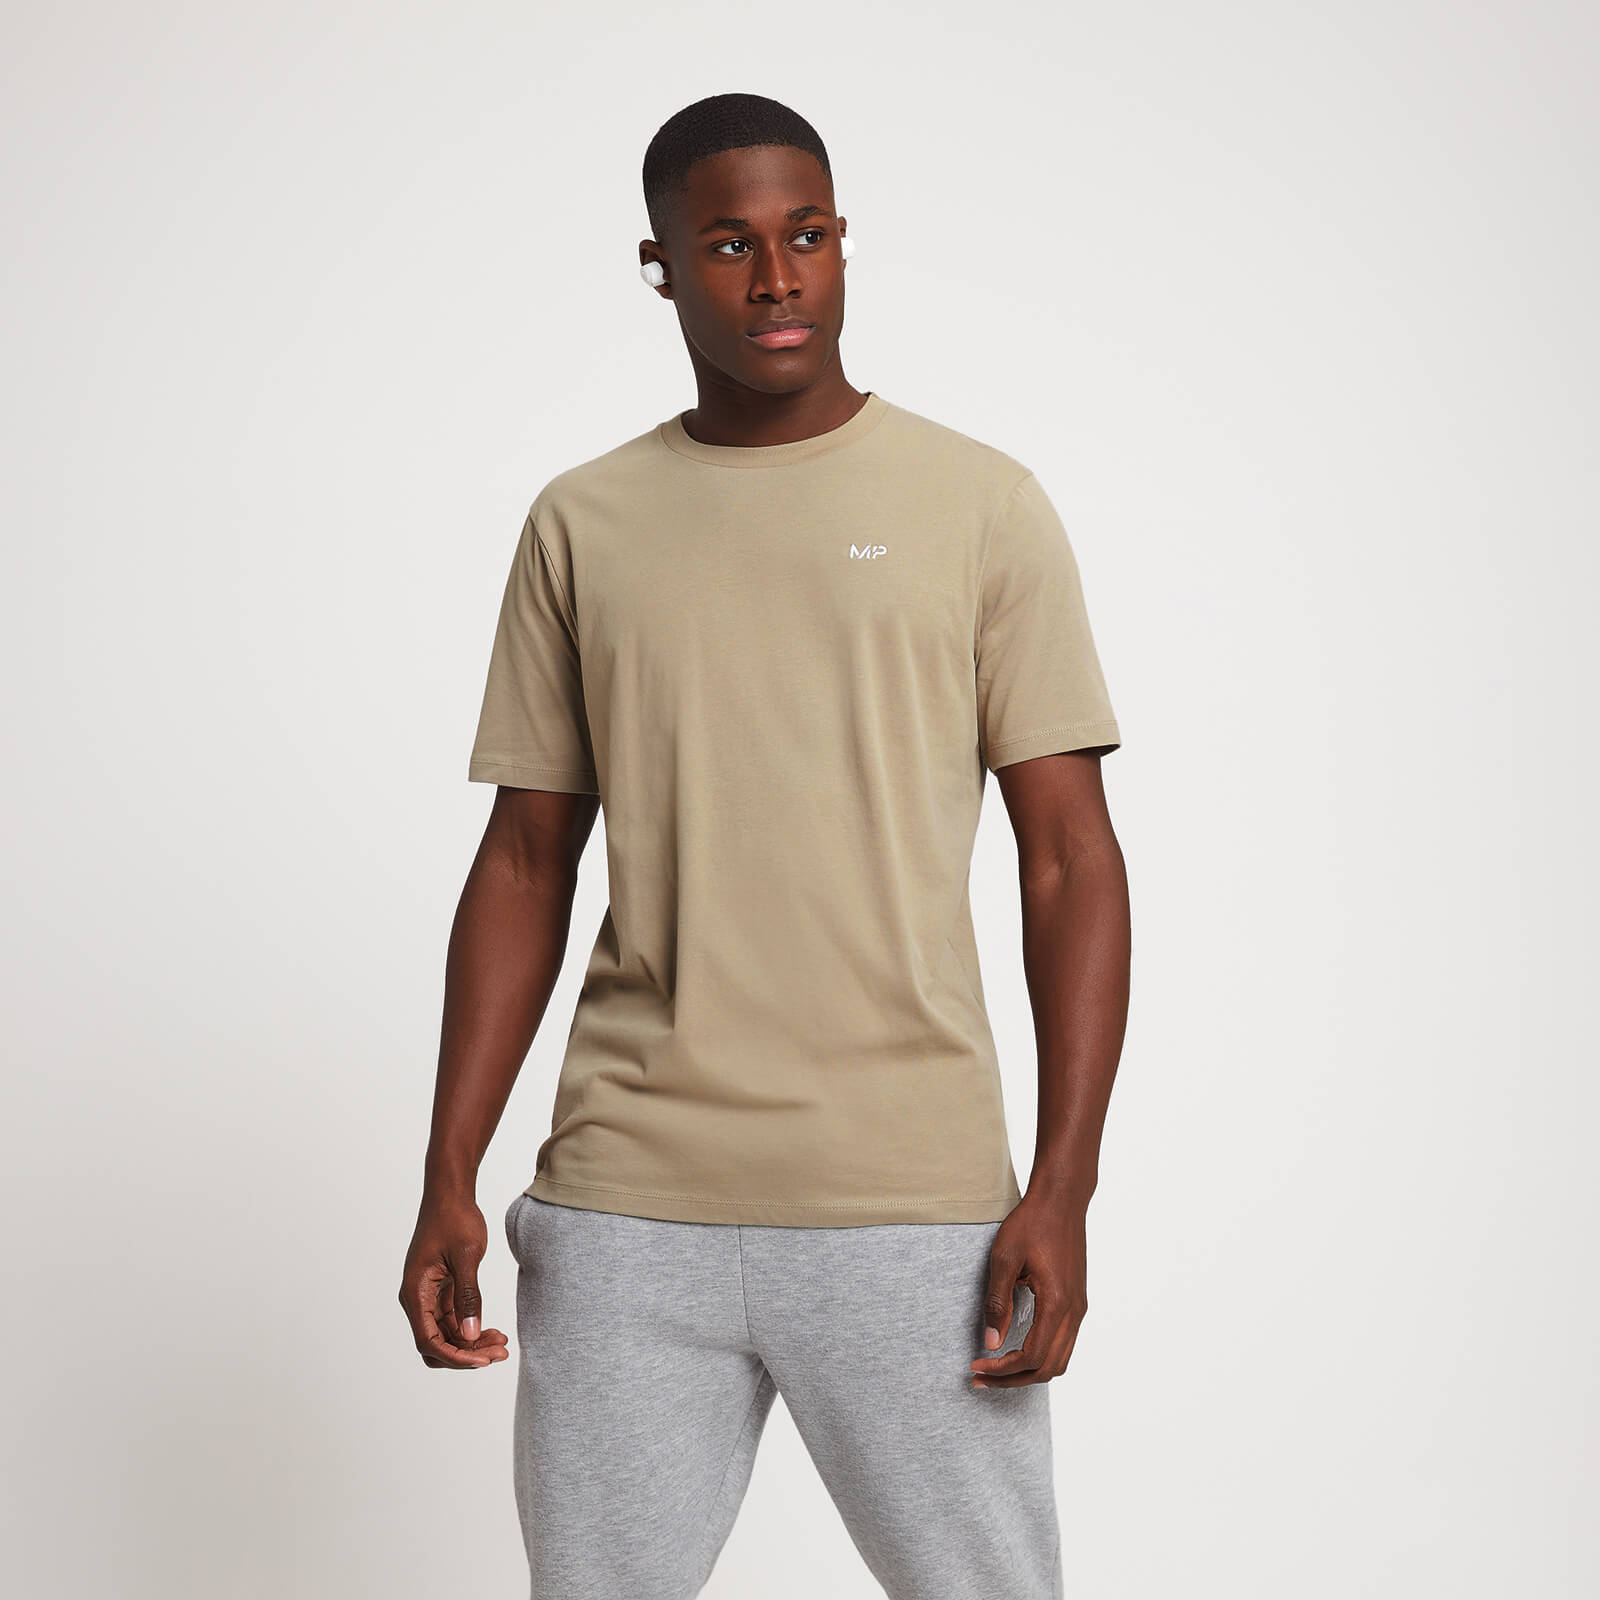 MP Men's Rest Day Short Sleeve T-Shirt - Taupe - S